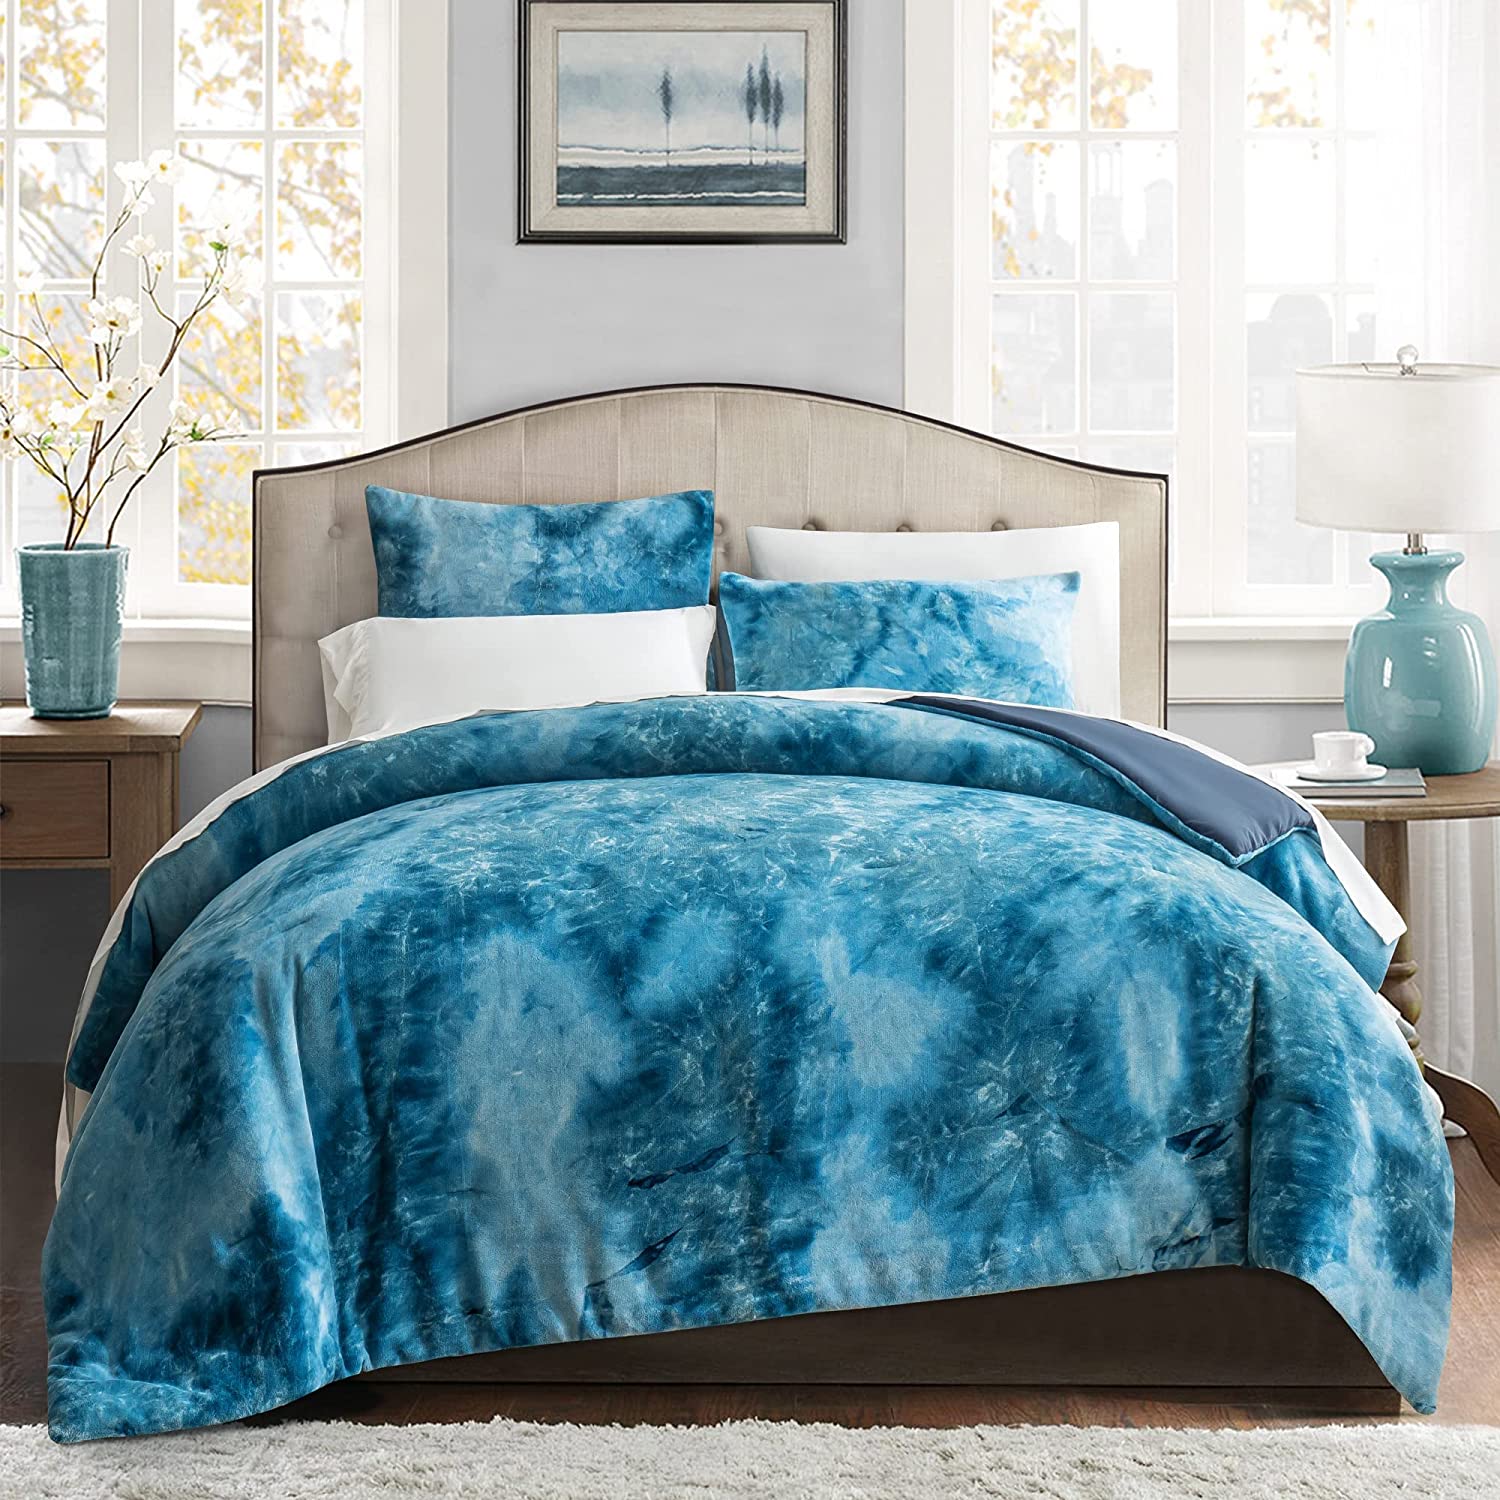 SHALALA Comforter Set Bed-in-A-Bag 7-Piece Cationic Dyeing Comforter & Sheet Set with 14 Deep Pocket Lightweight for All Season King Blue Grey 